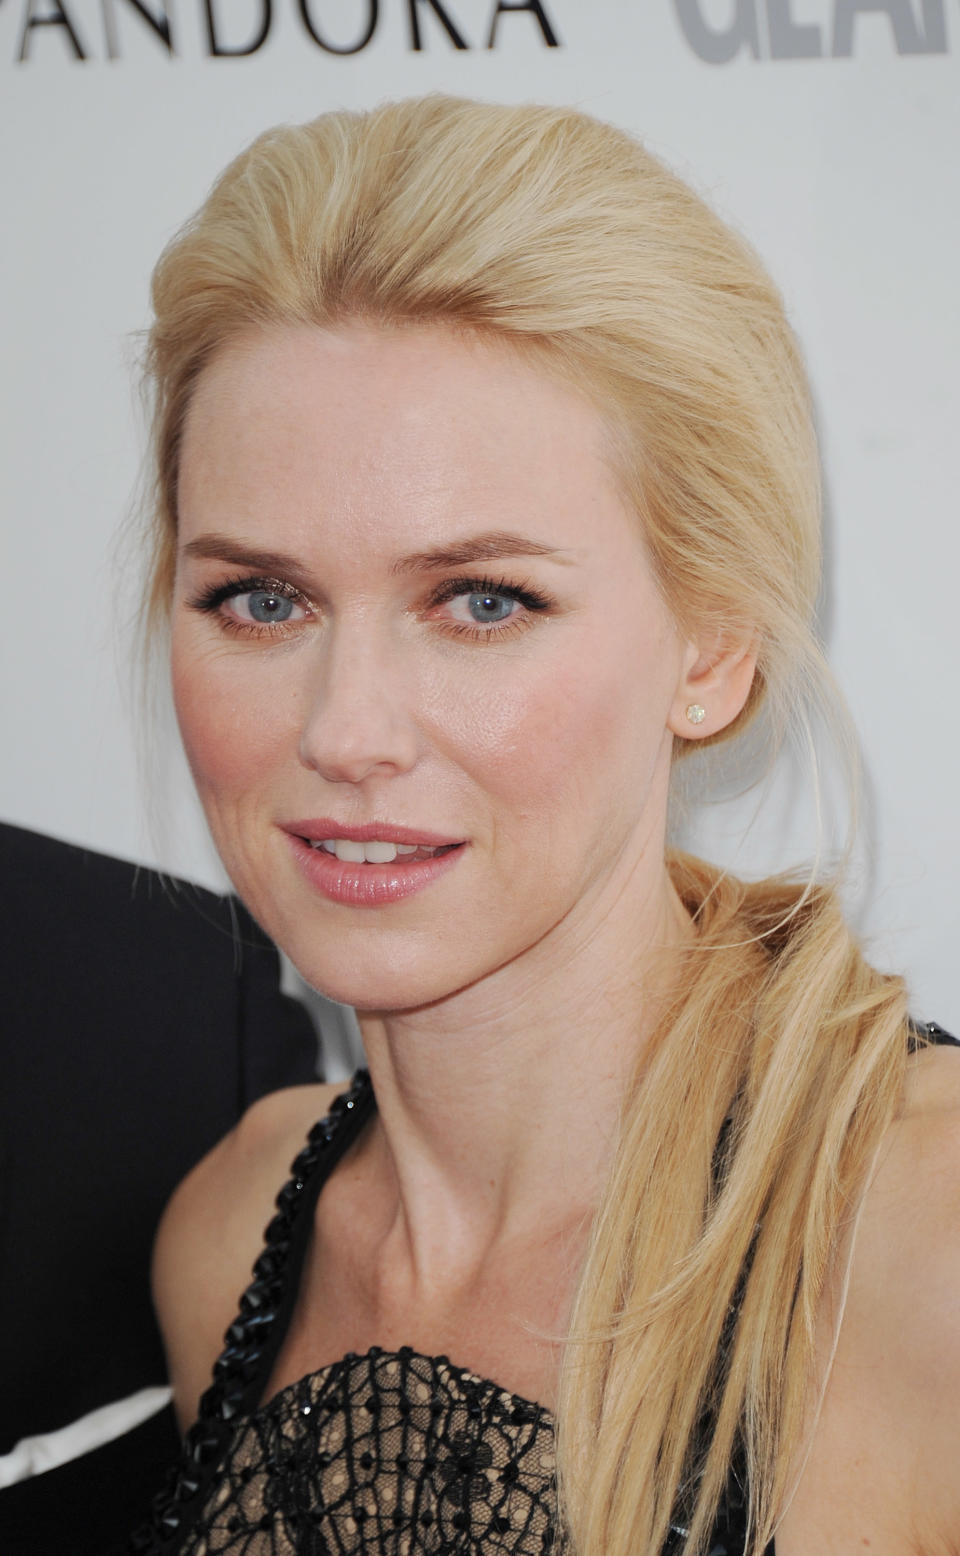 LONDON, UNITED KINGDOM - MAY 29: Naomi Watts attends Glamour Women of the Year Awards 2012 at Berkeley Square Gardens on May 29, 2012 in London, England. (Photo by Stuart Wilson/Getty Images)